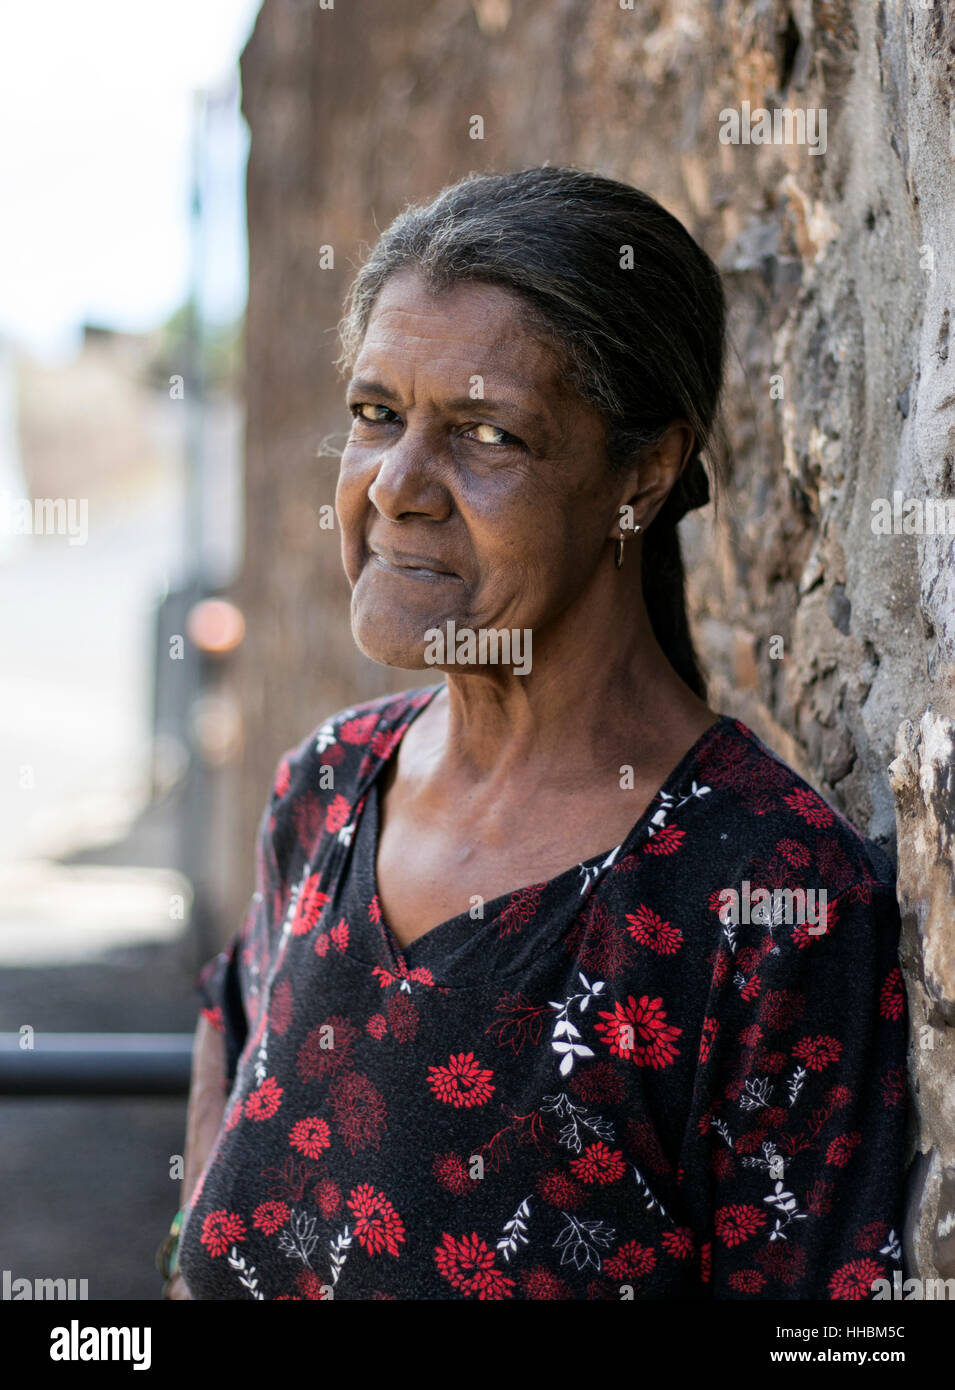 Portrait of a local woman from Jamestown, St Helena Island. Stock Photo